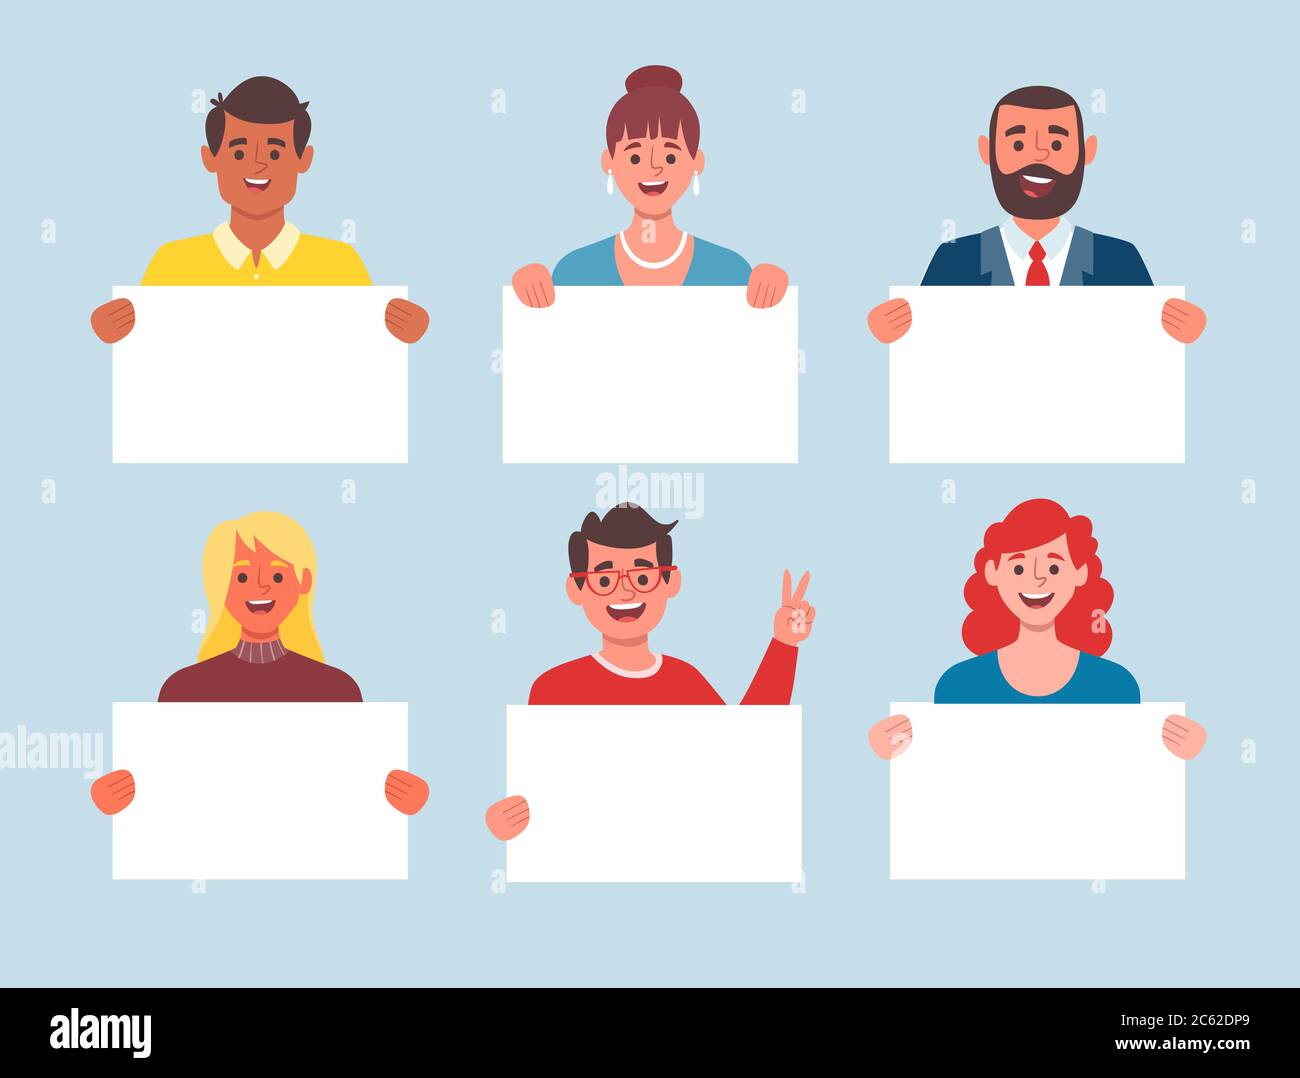 Collection of young people holding blank placards. Bundle of male and female cartoon characters. Colorful vector illustration in flat style. Stock Vector